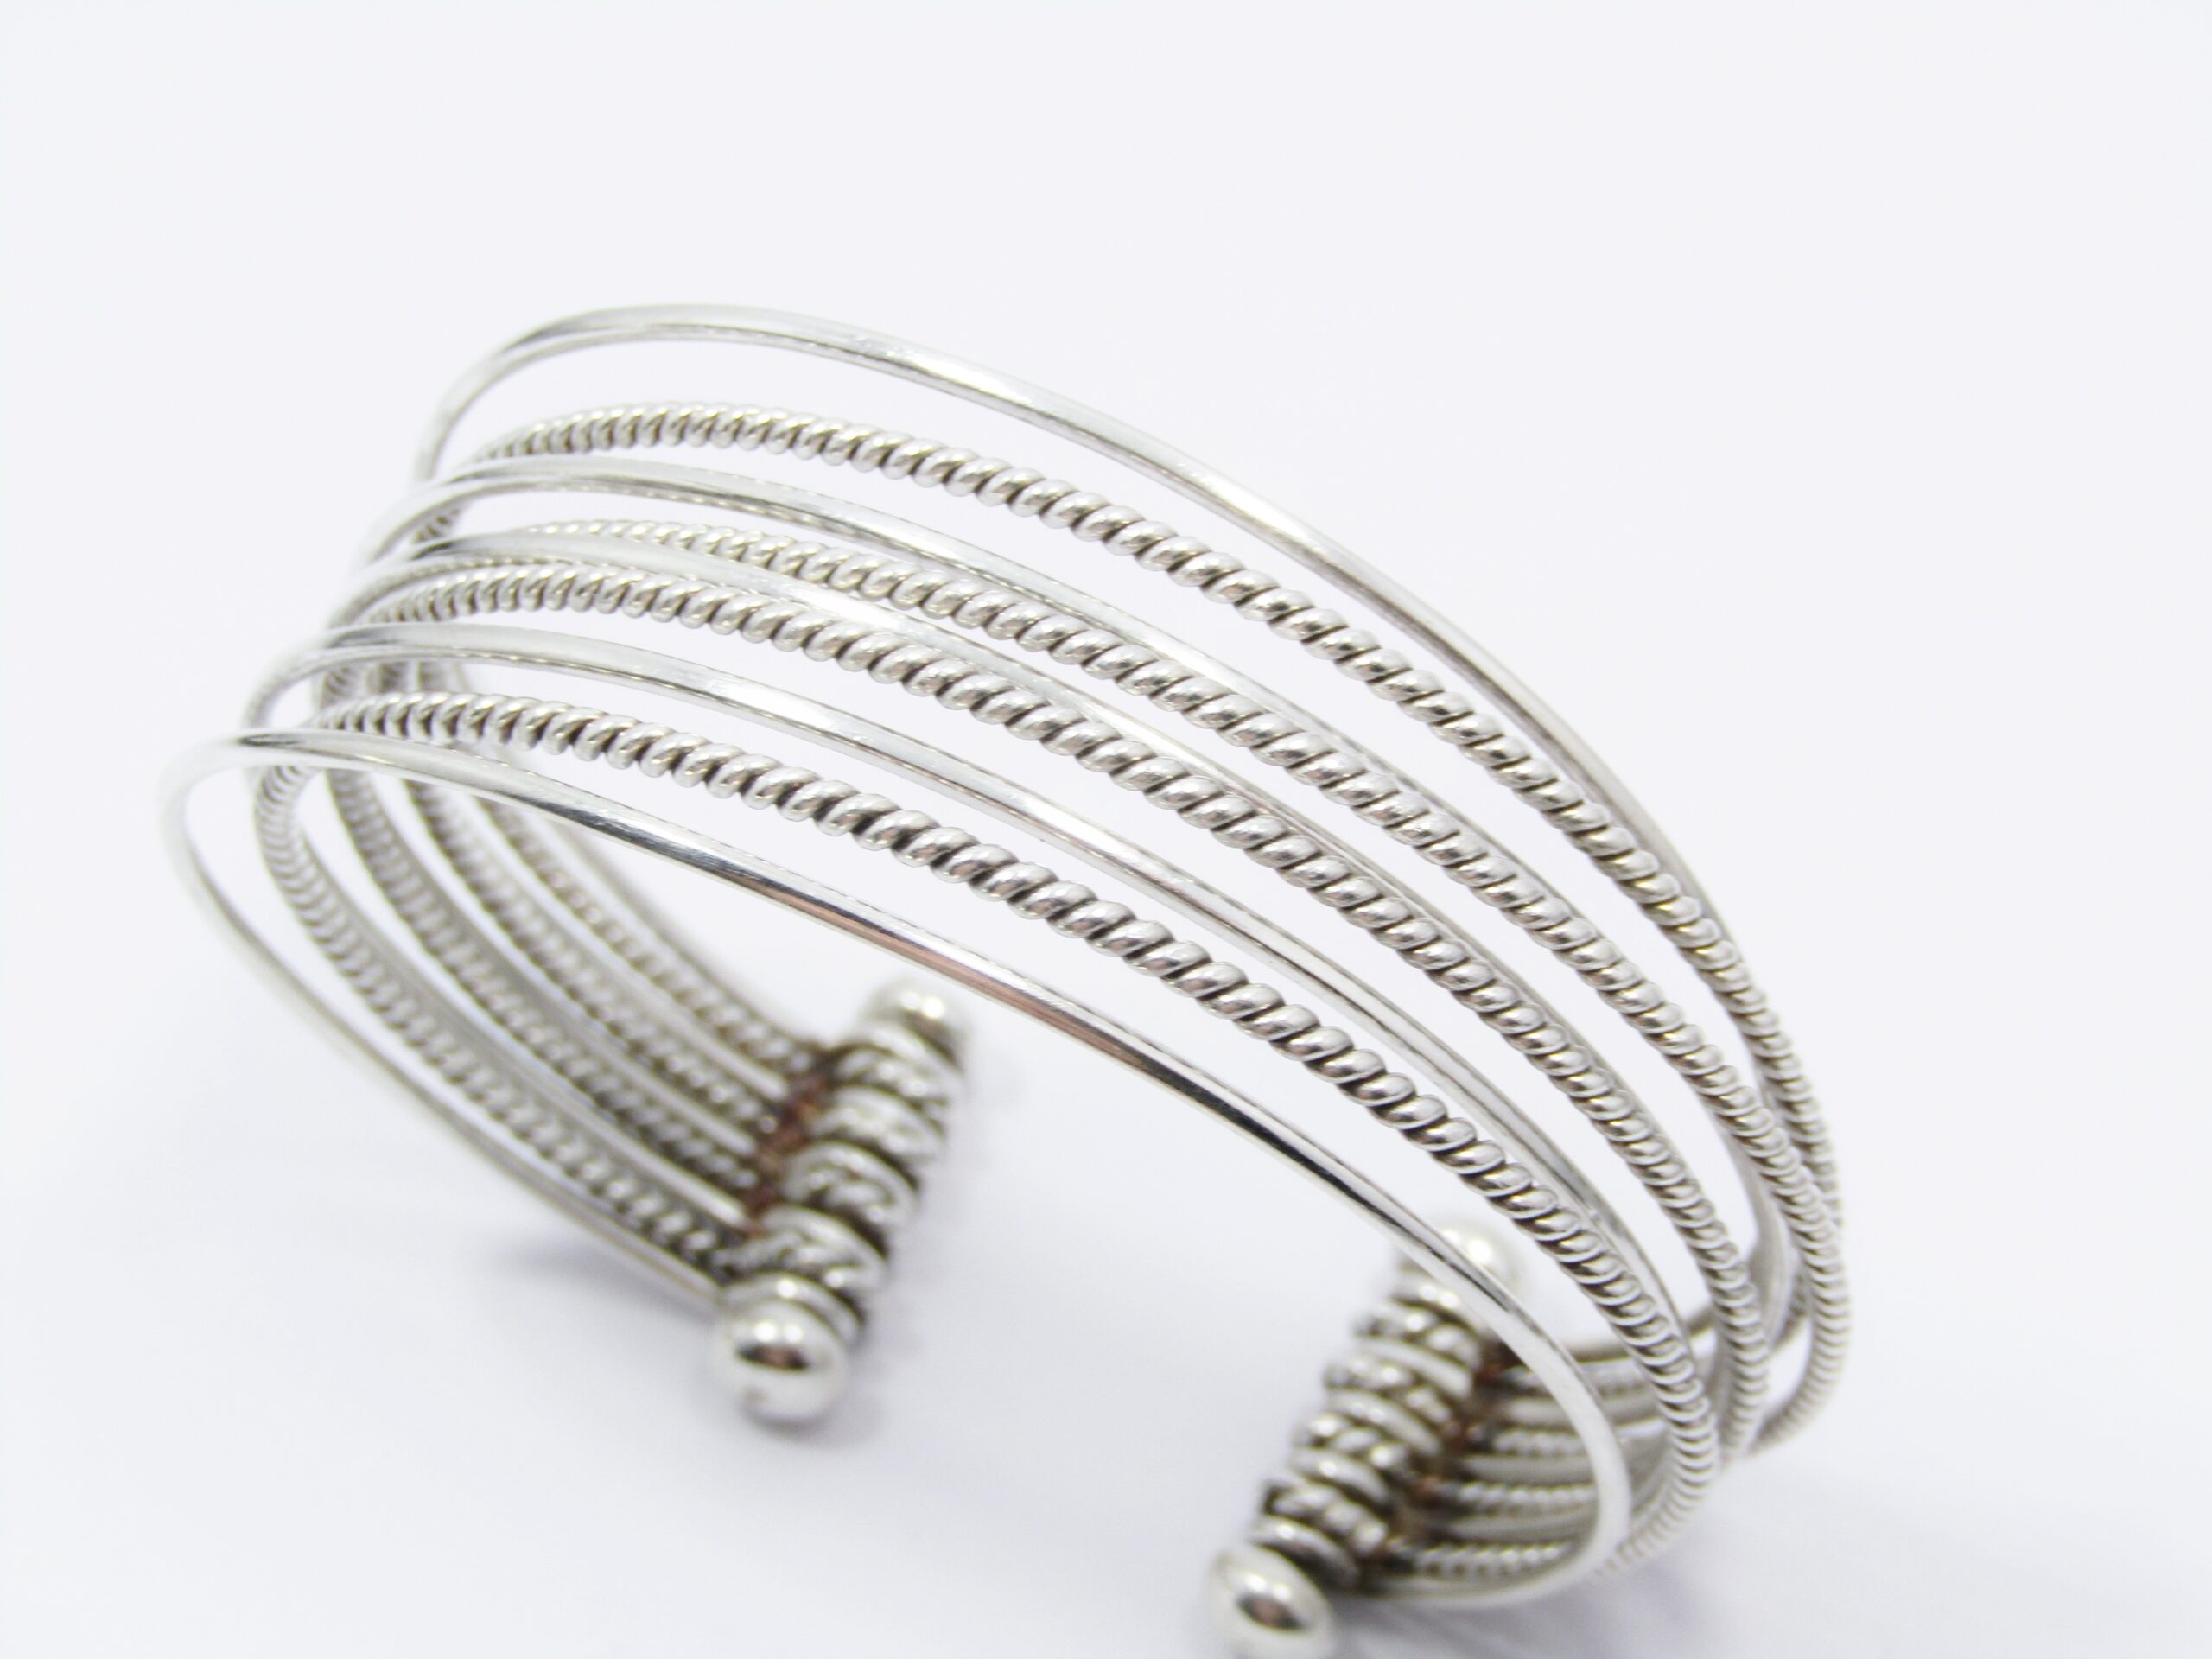 A Spectacular 9 Strand Cuff Bangle in Sterling Silver.